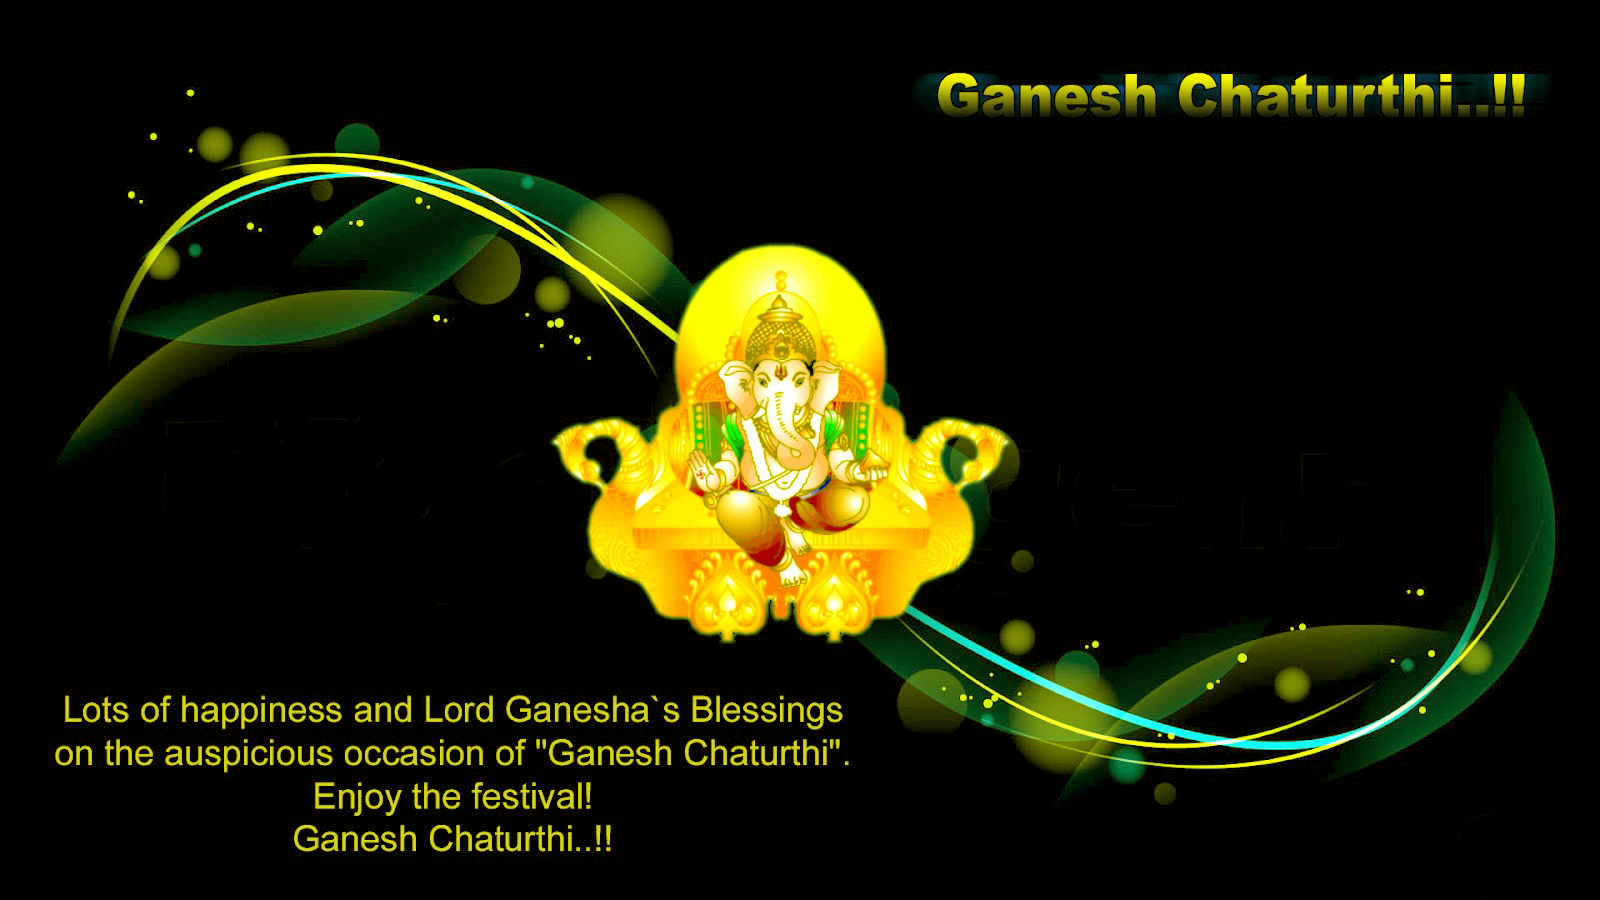 HD}]Ganesh Chaturthi Wallpapers Wishes, SMS & Messages